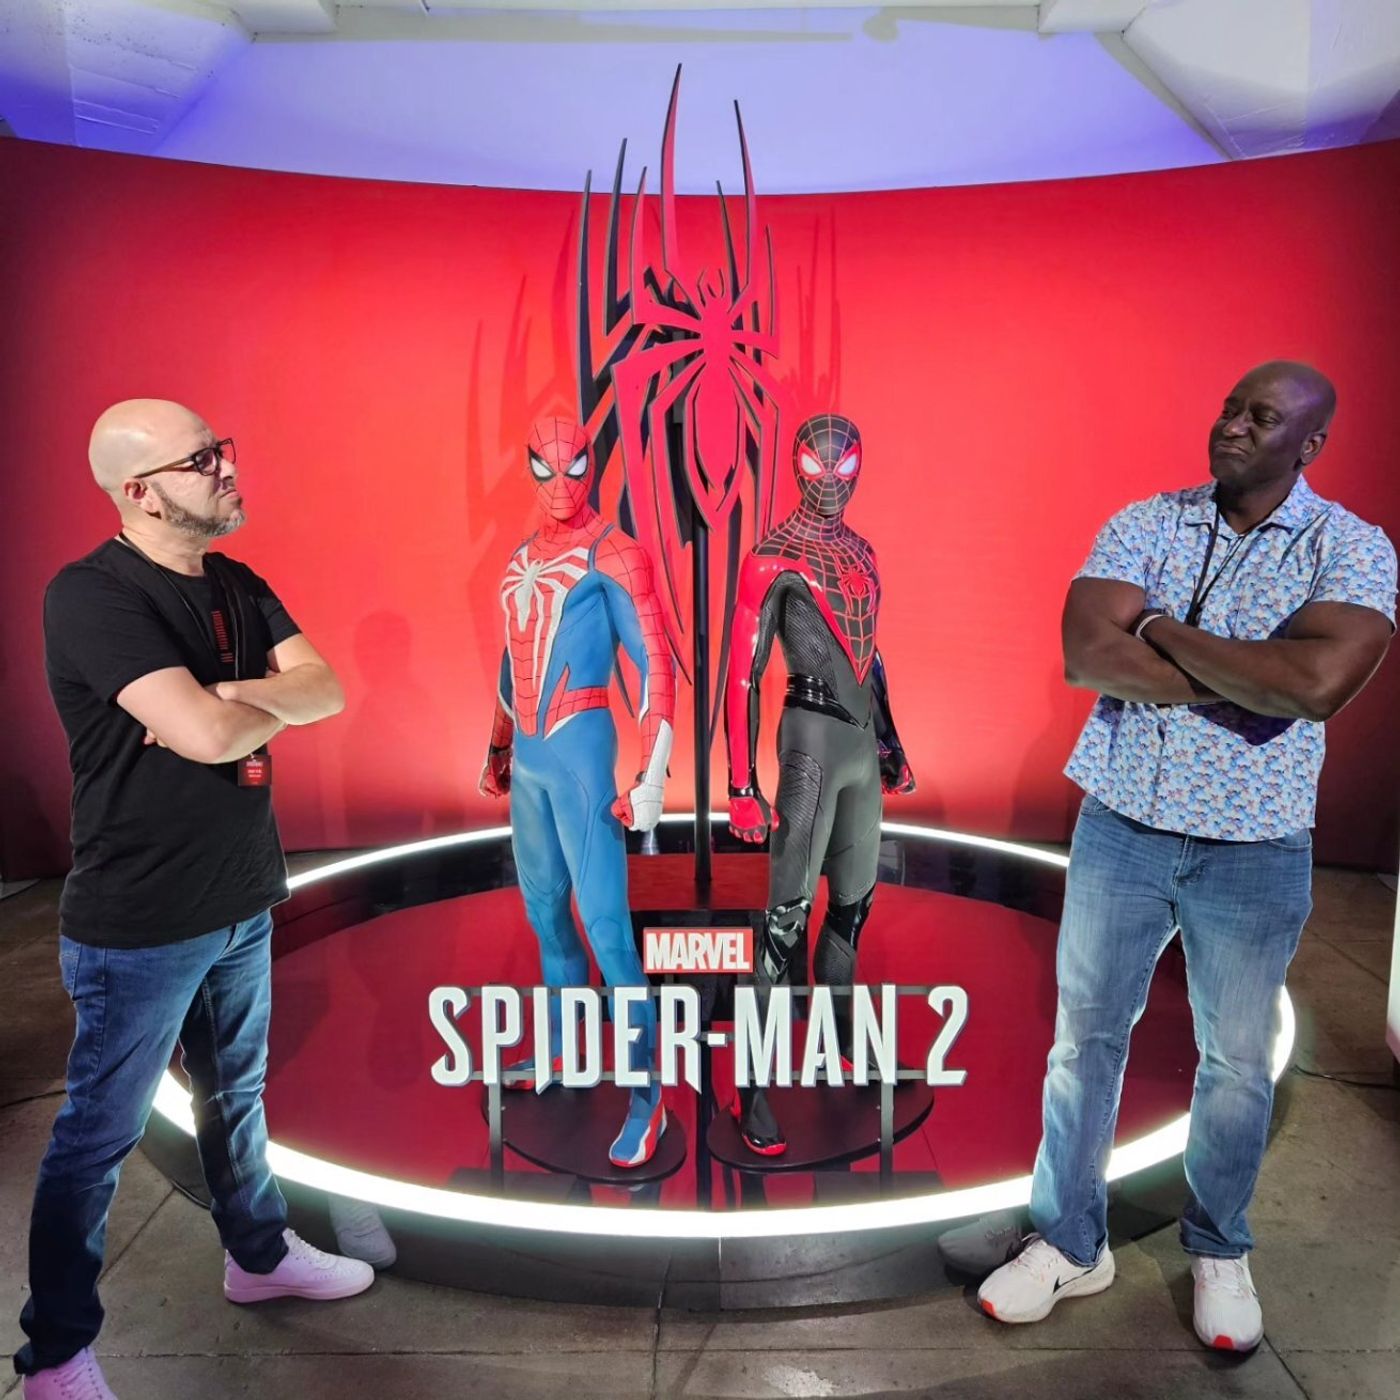 S18 Ep1303: Spider-Man 2 Hands-On Impressions and Interview